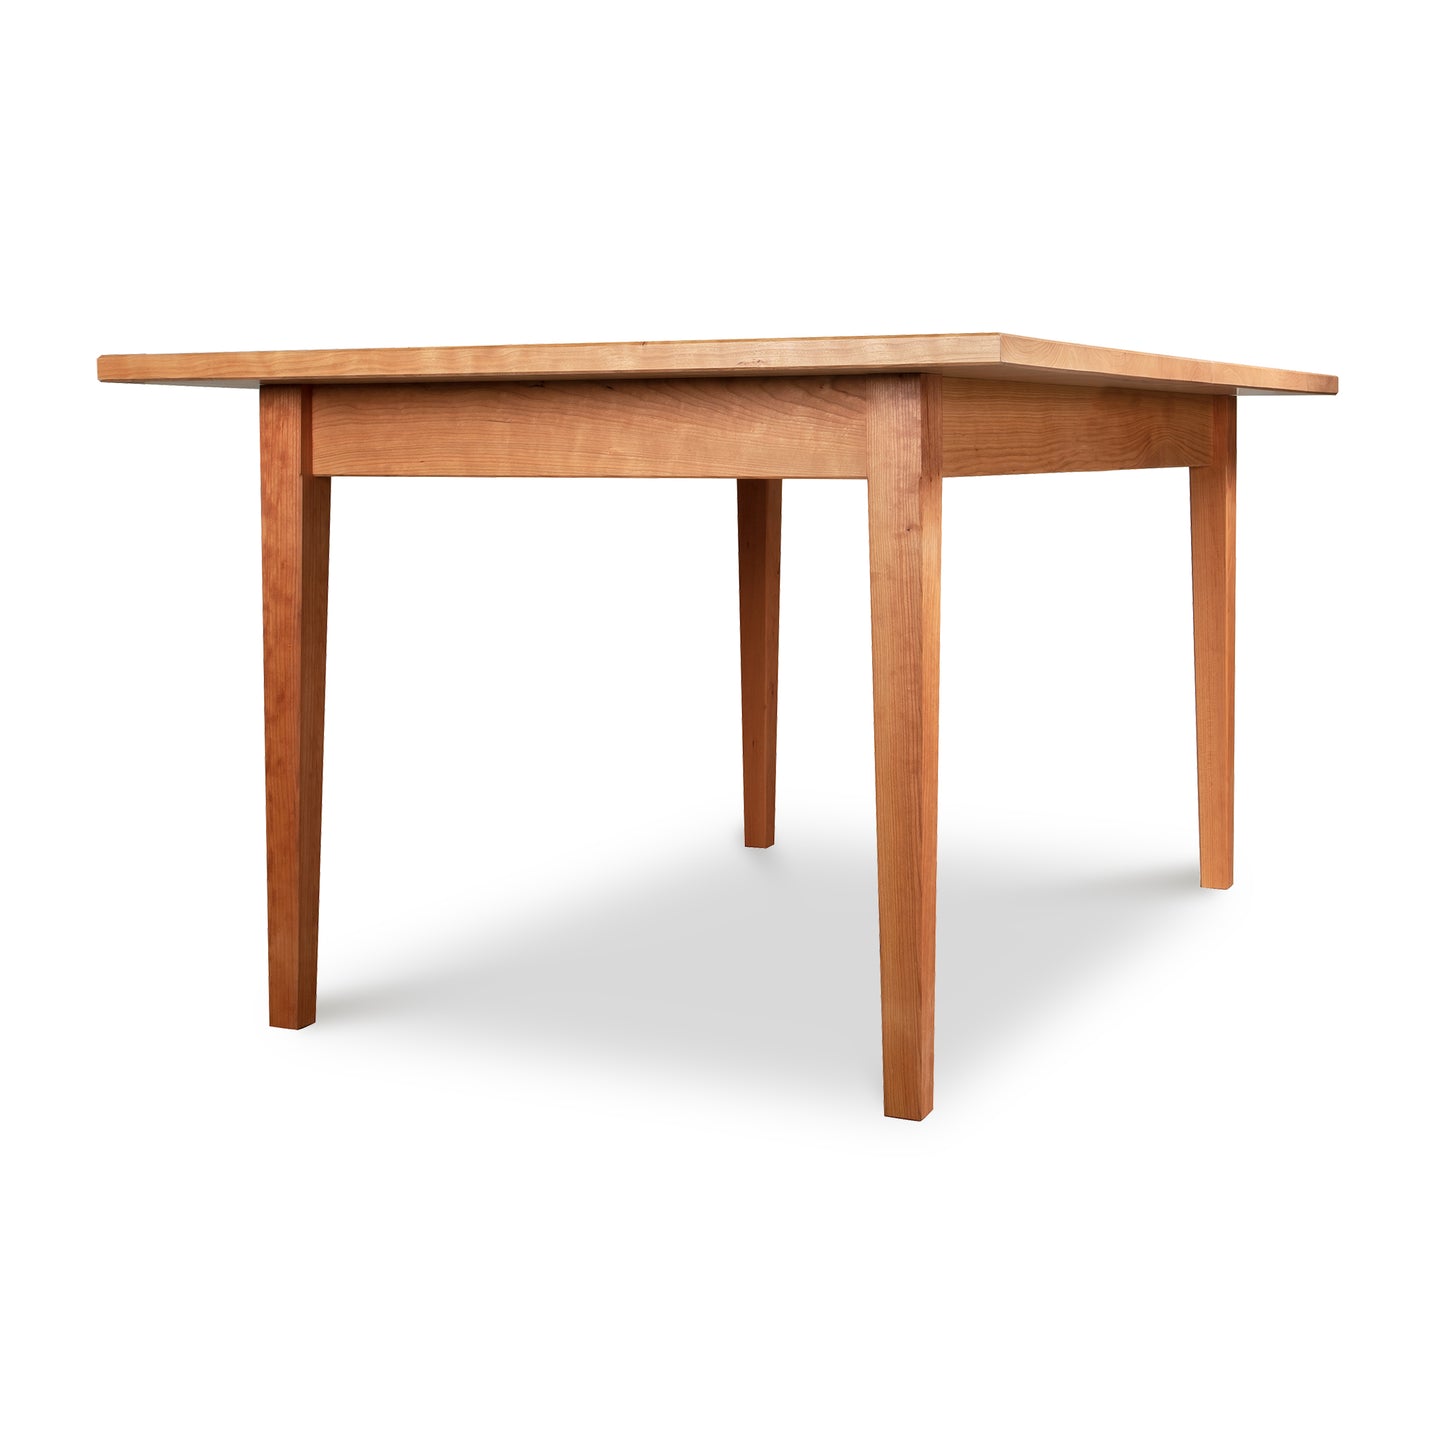 A simple Vermont Shaker Rectangular Solid Top Dining Table with a rectangular top and four straight legs, isolated on a white background. By Maple Corner Woodworks.